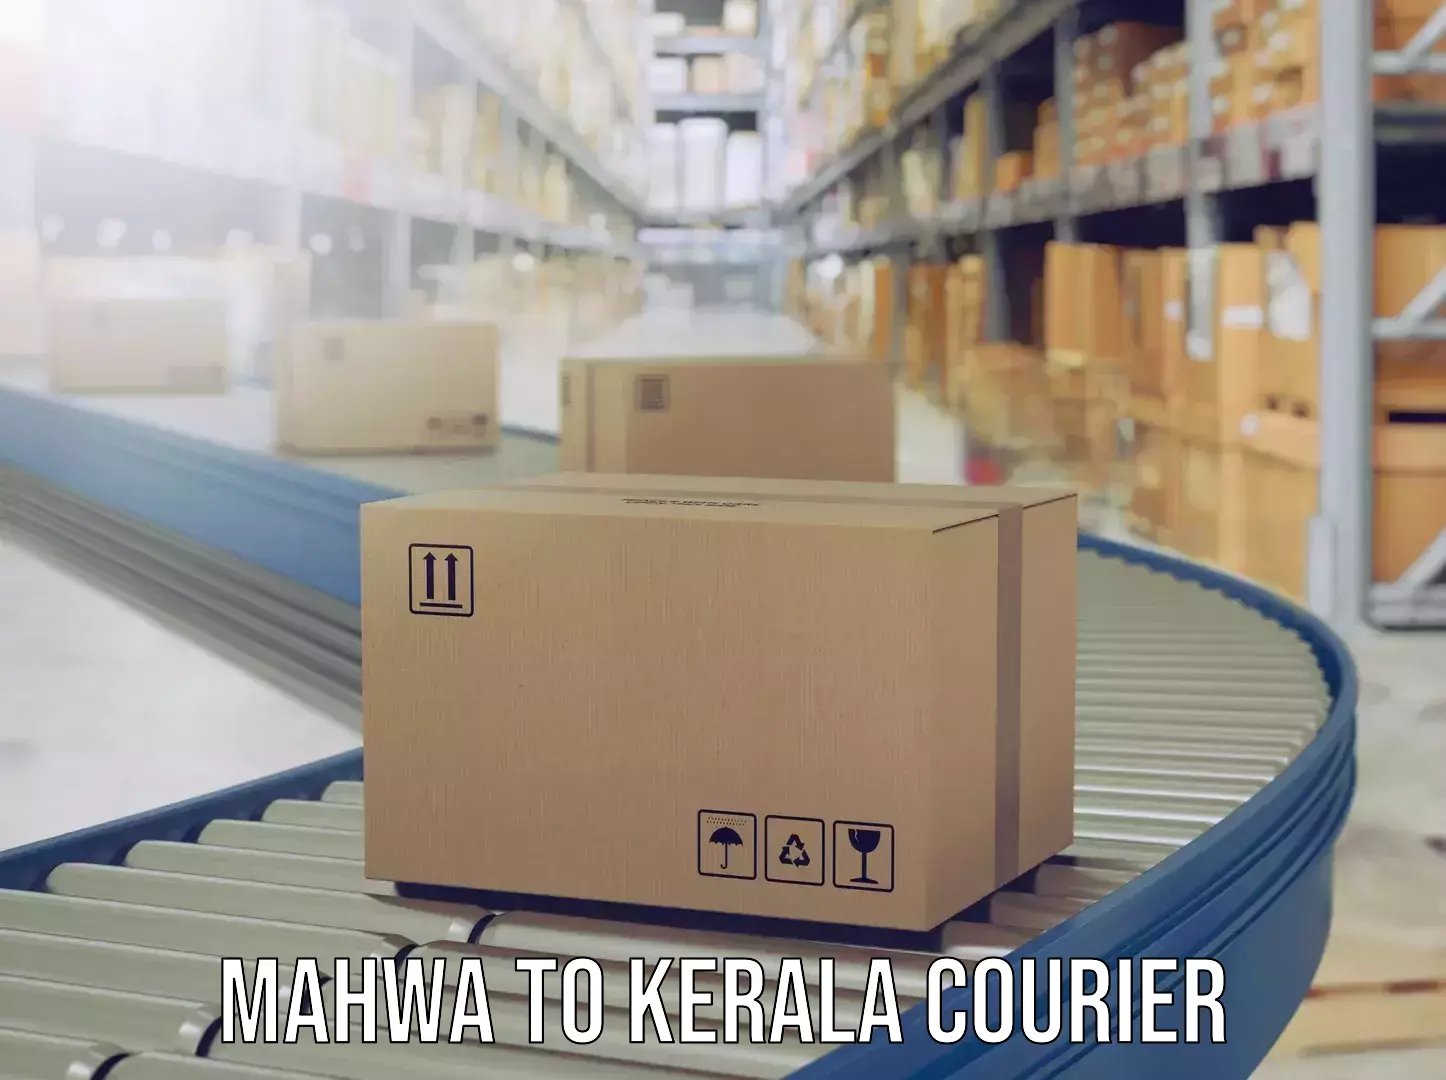 Luggage transport consultancy Mahwa to Kerala